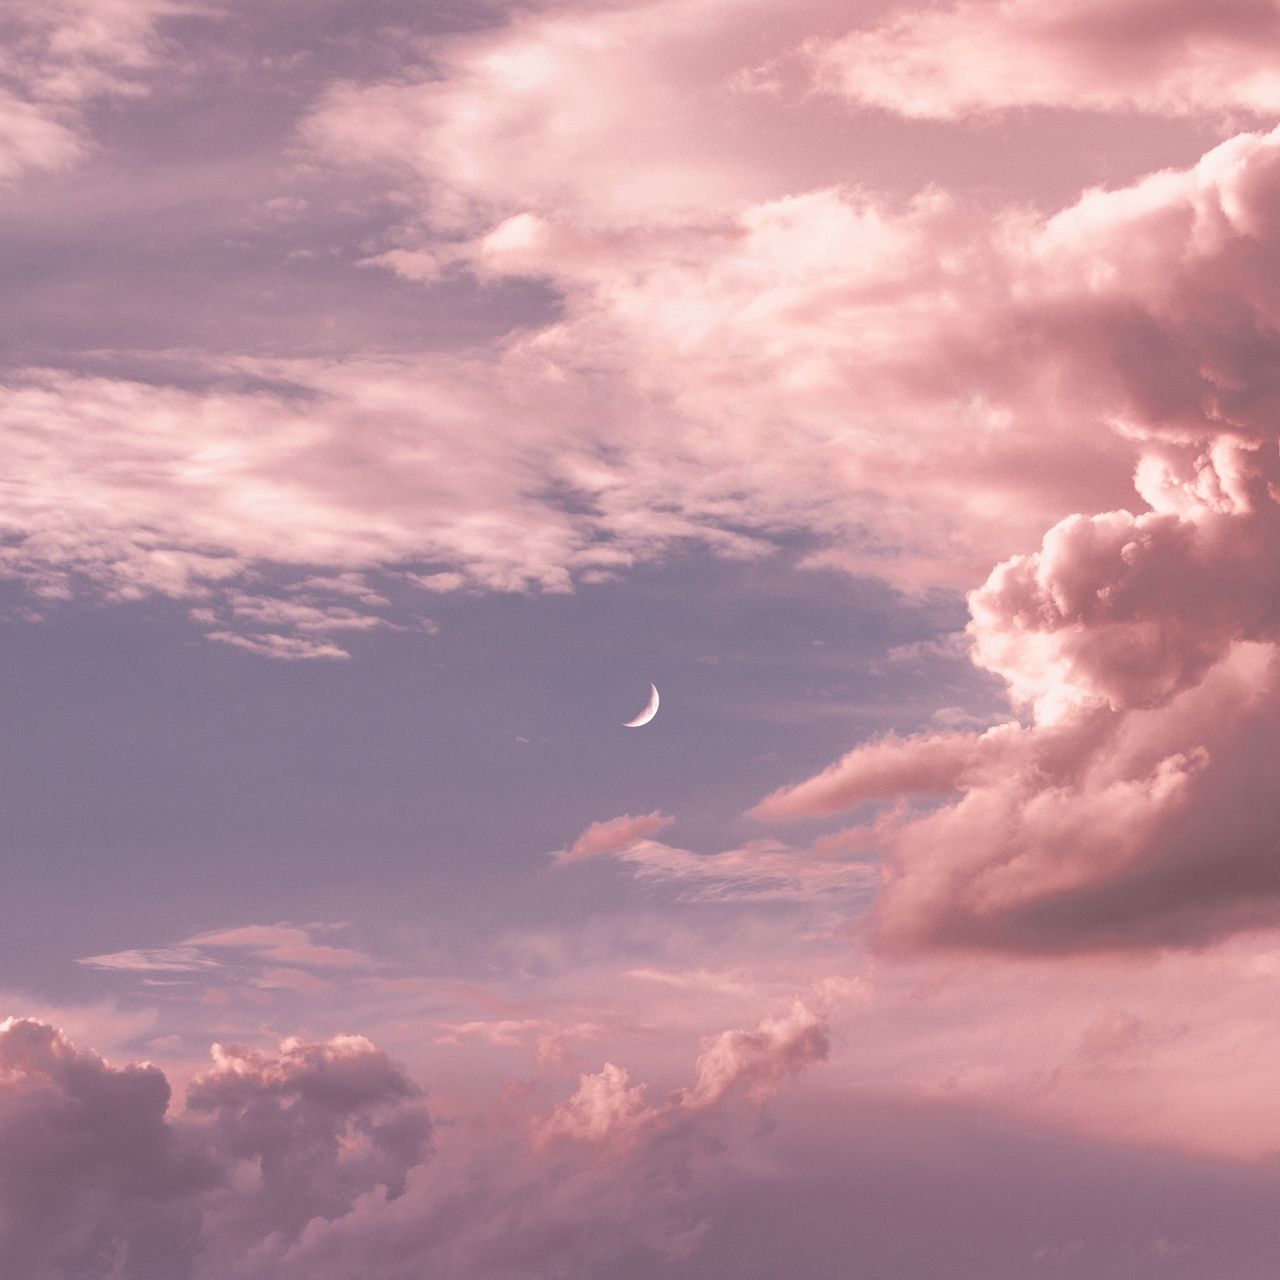 Full Moon Clouds Images - Free Download on Freepik